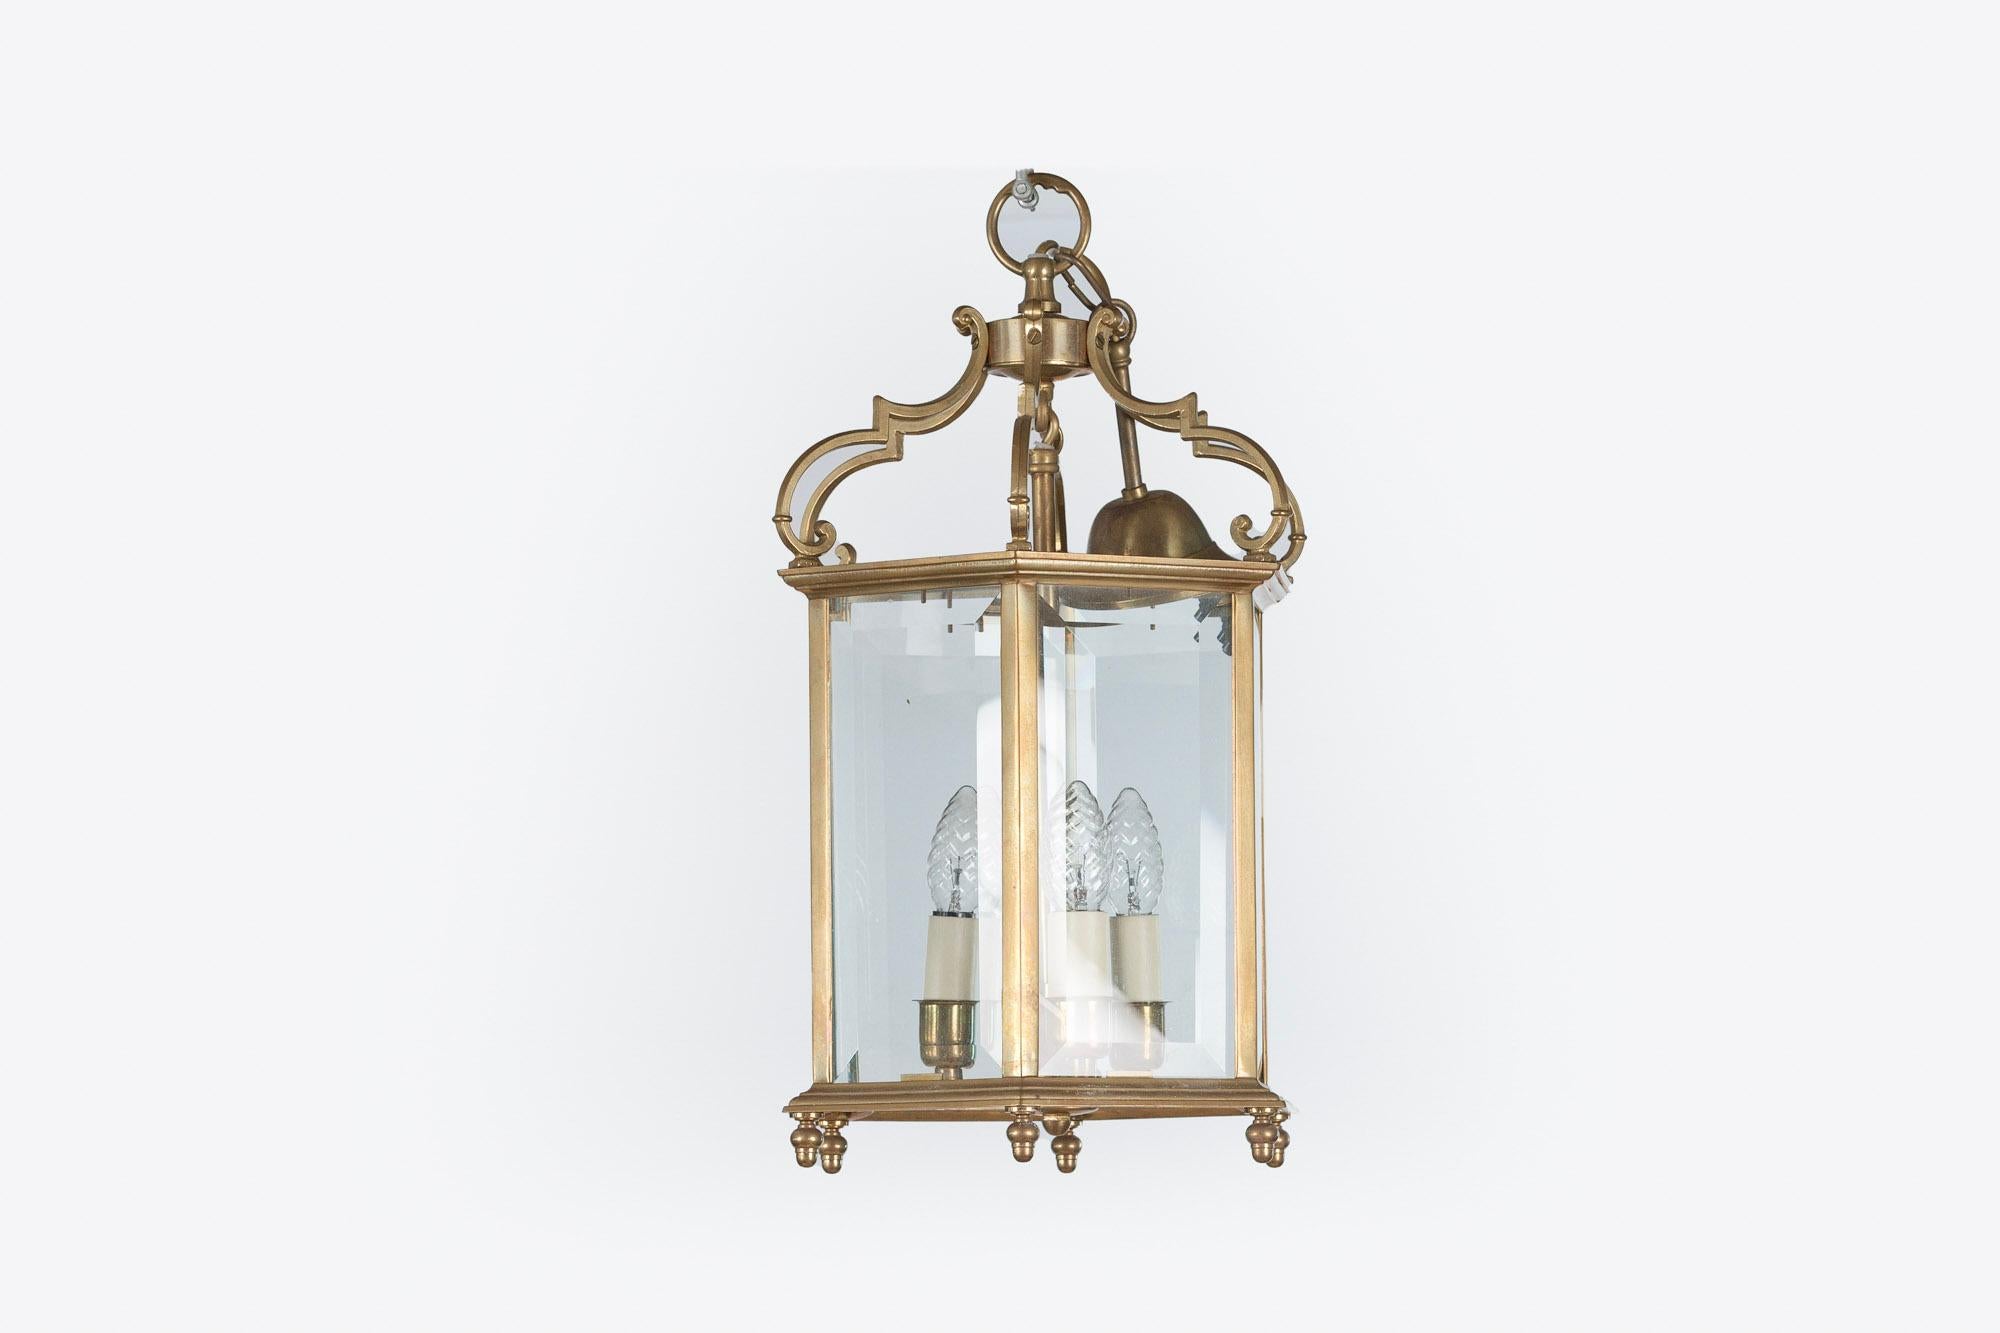 19th century pair of brass hexagonal lanterns, the finial base supporting the beveled glass case enclosing three branch light fitting surmounted with scroll detail, electrified.